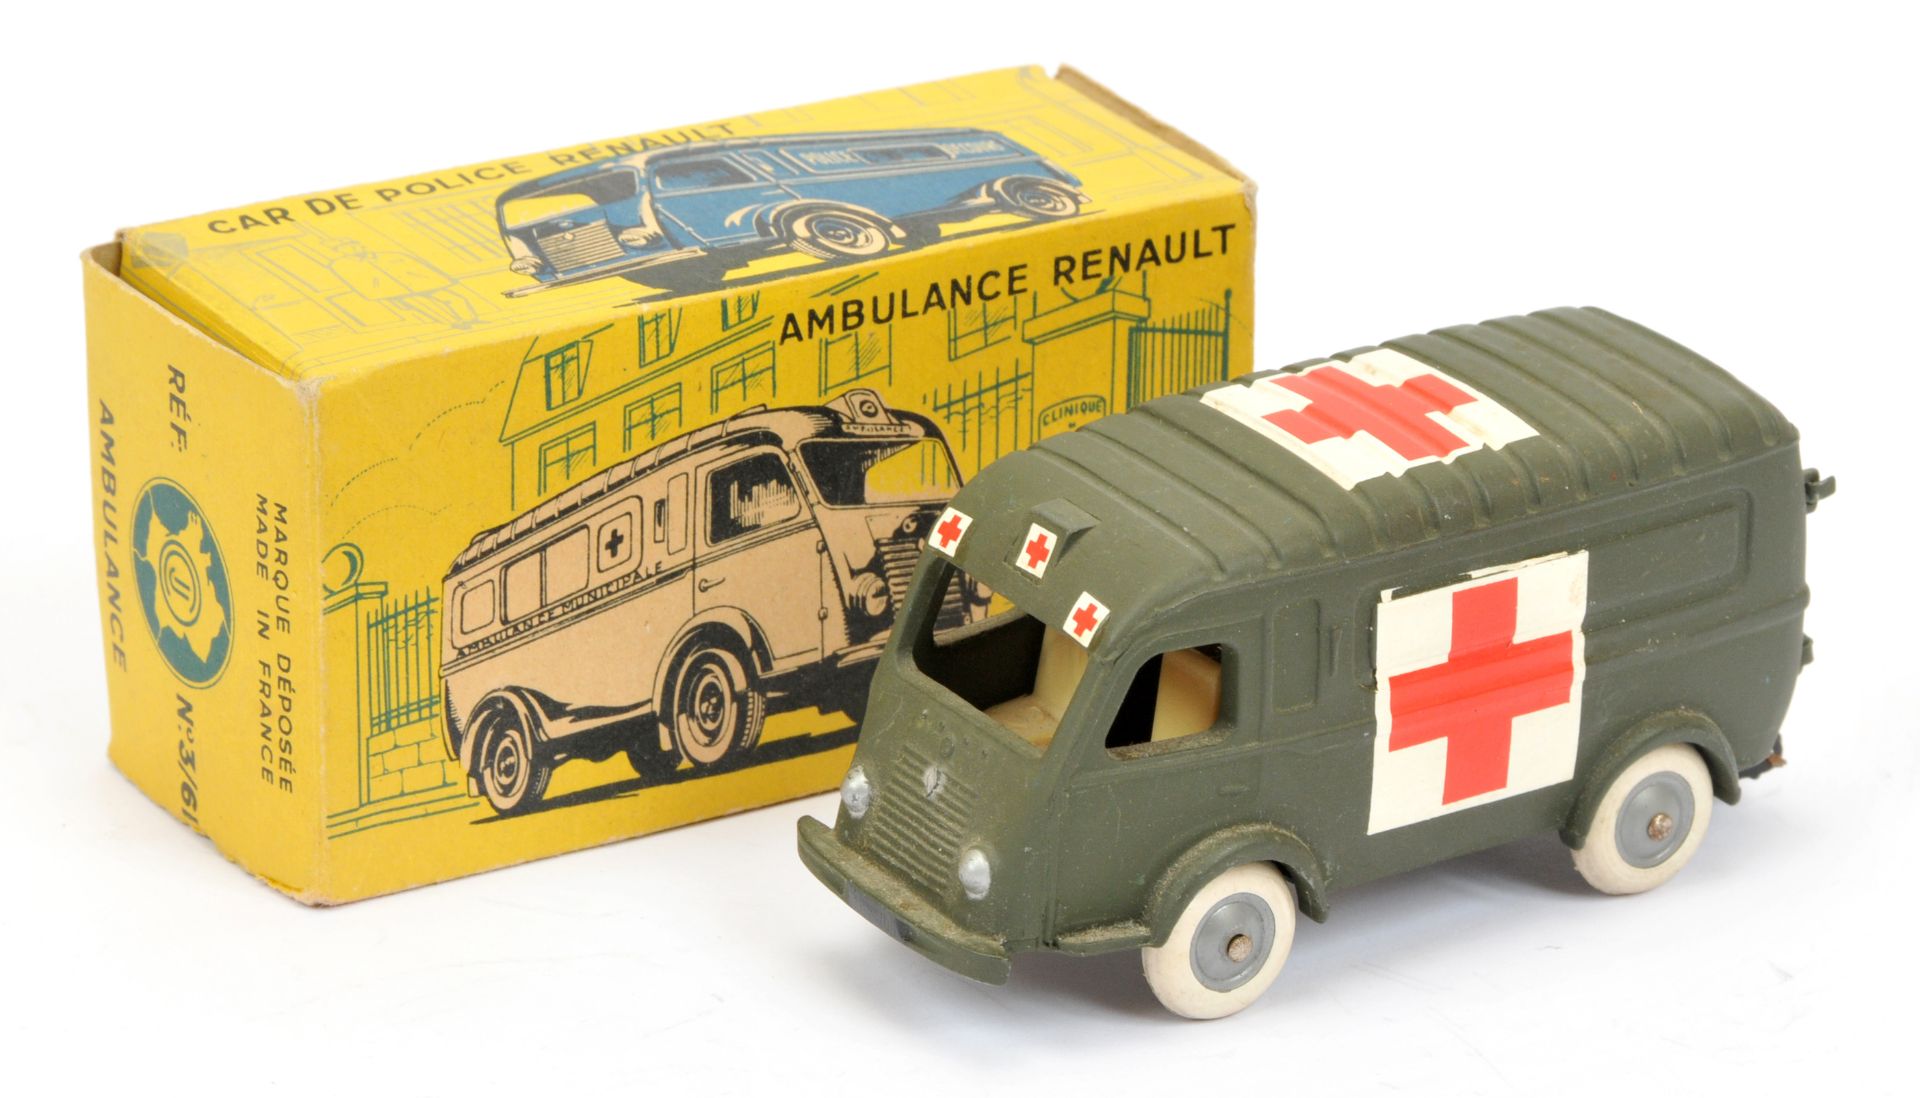 CIJ 3/61 Renault "Ambulance" - drab green, with red and white cross on roof, rear doors and sides